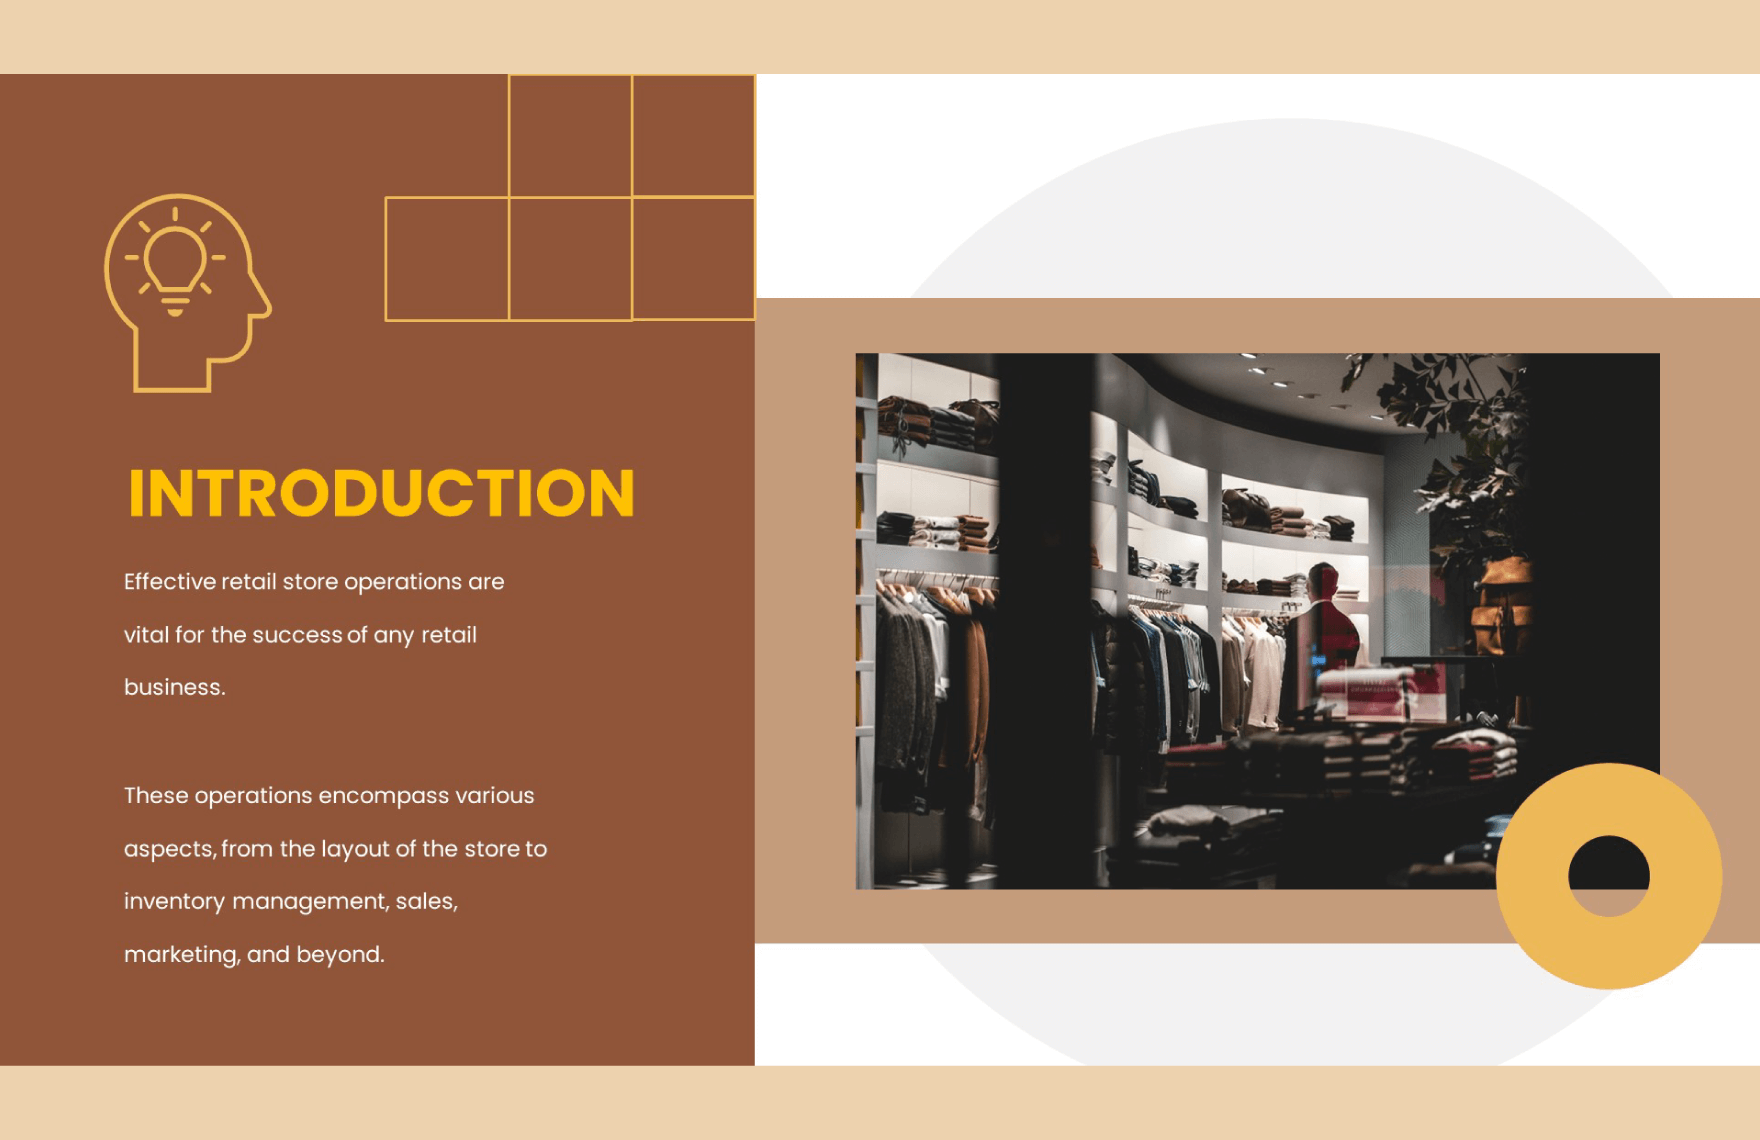 Retail Store Operations PPT Template